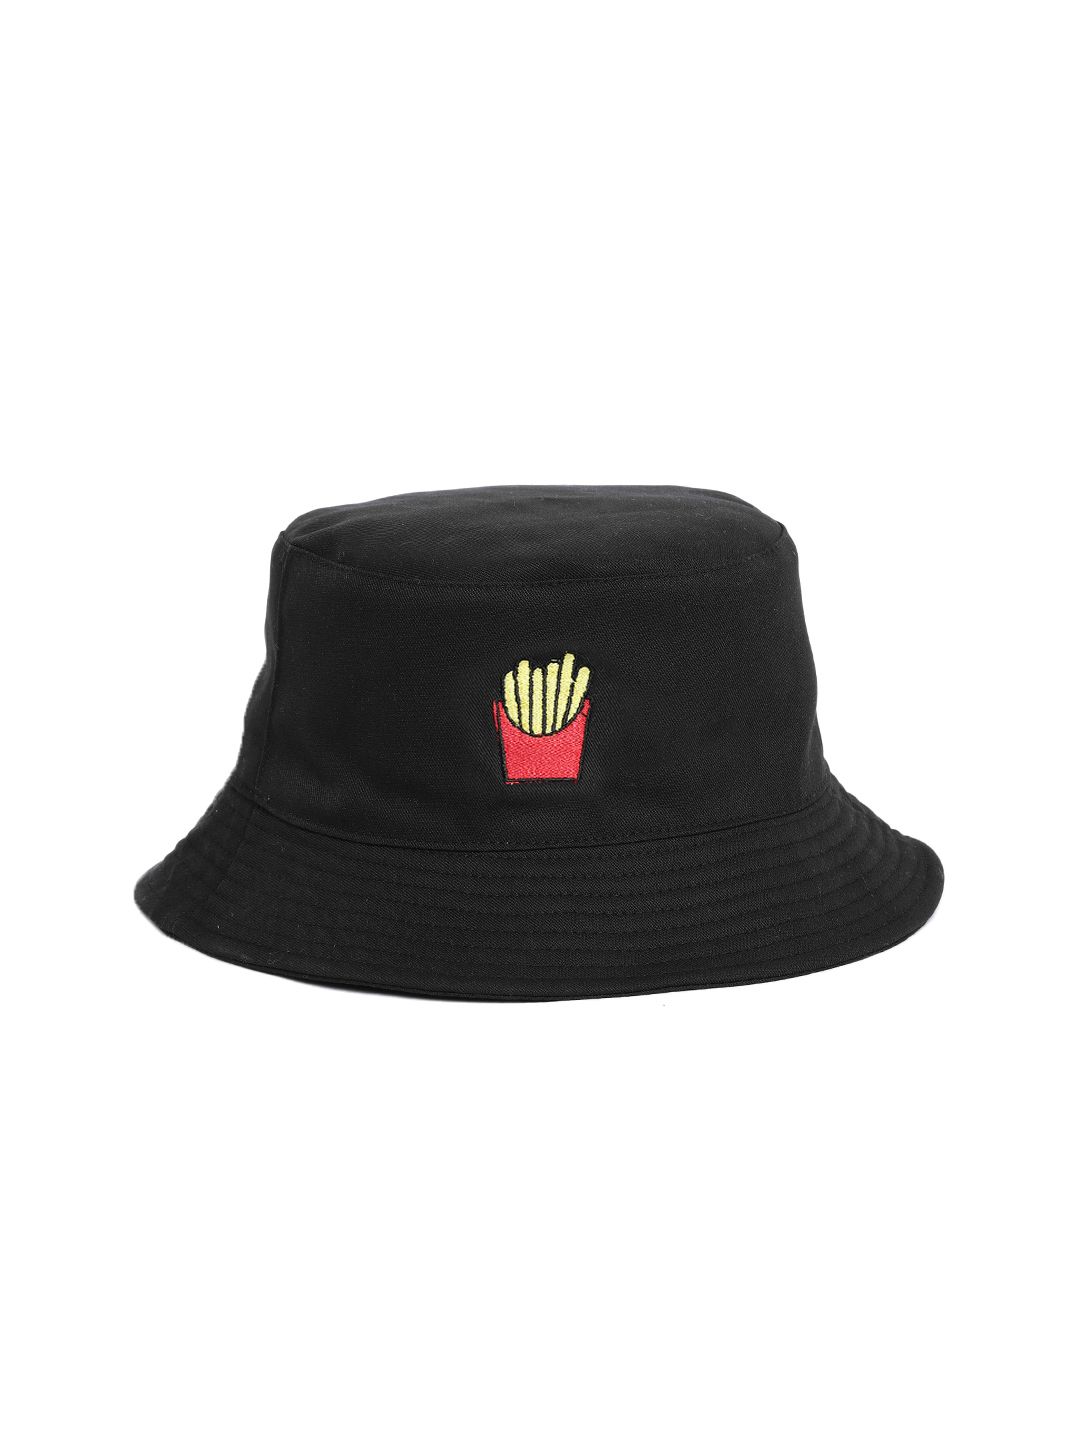 Blueberry Unisex Black & Red Embroidered Reversible Bucket Hat Price in India